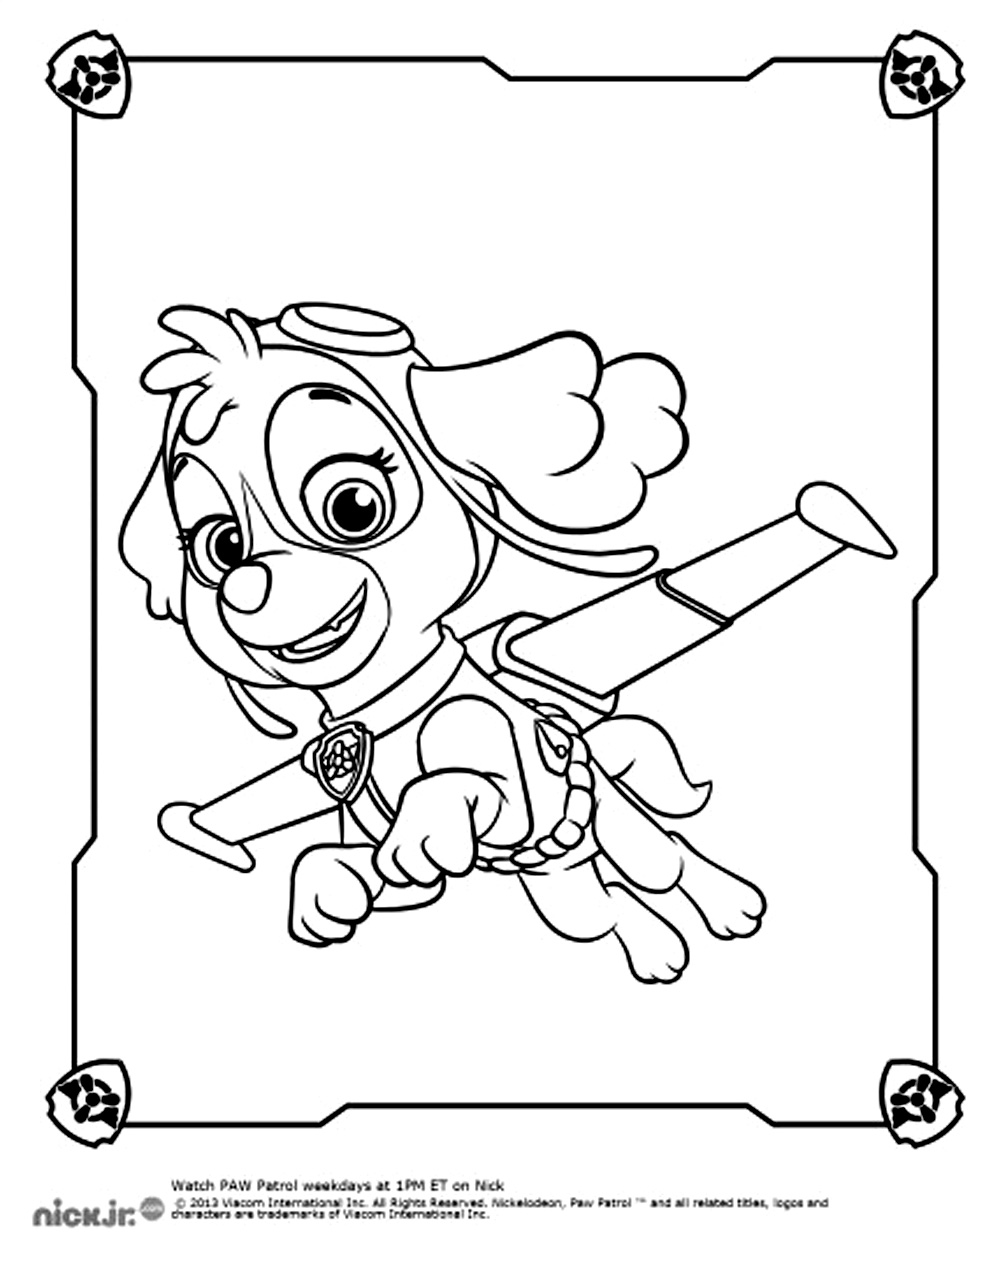 Paw patrol for kids - Paw Patrol Kids Coloring Pages